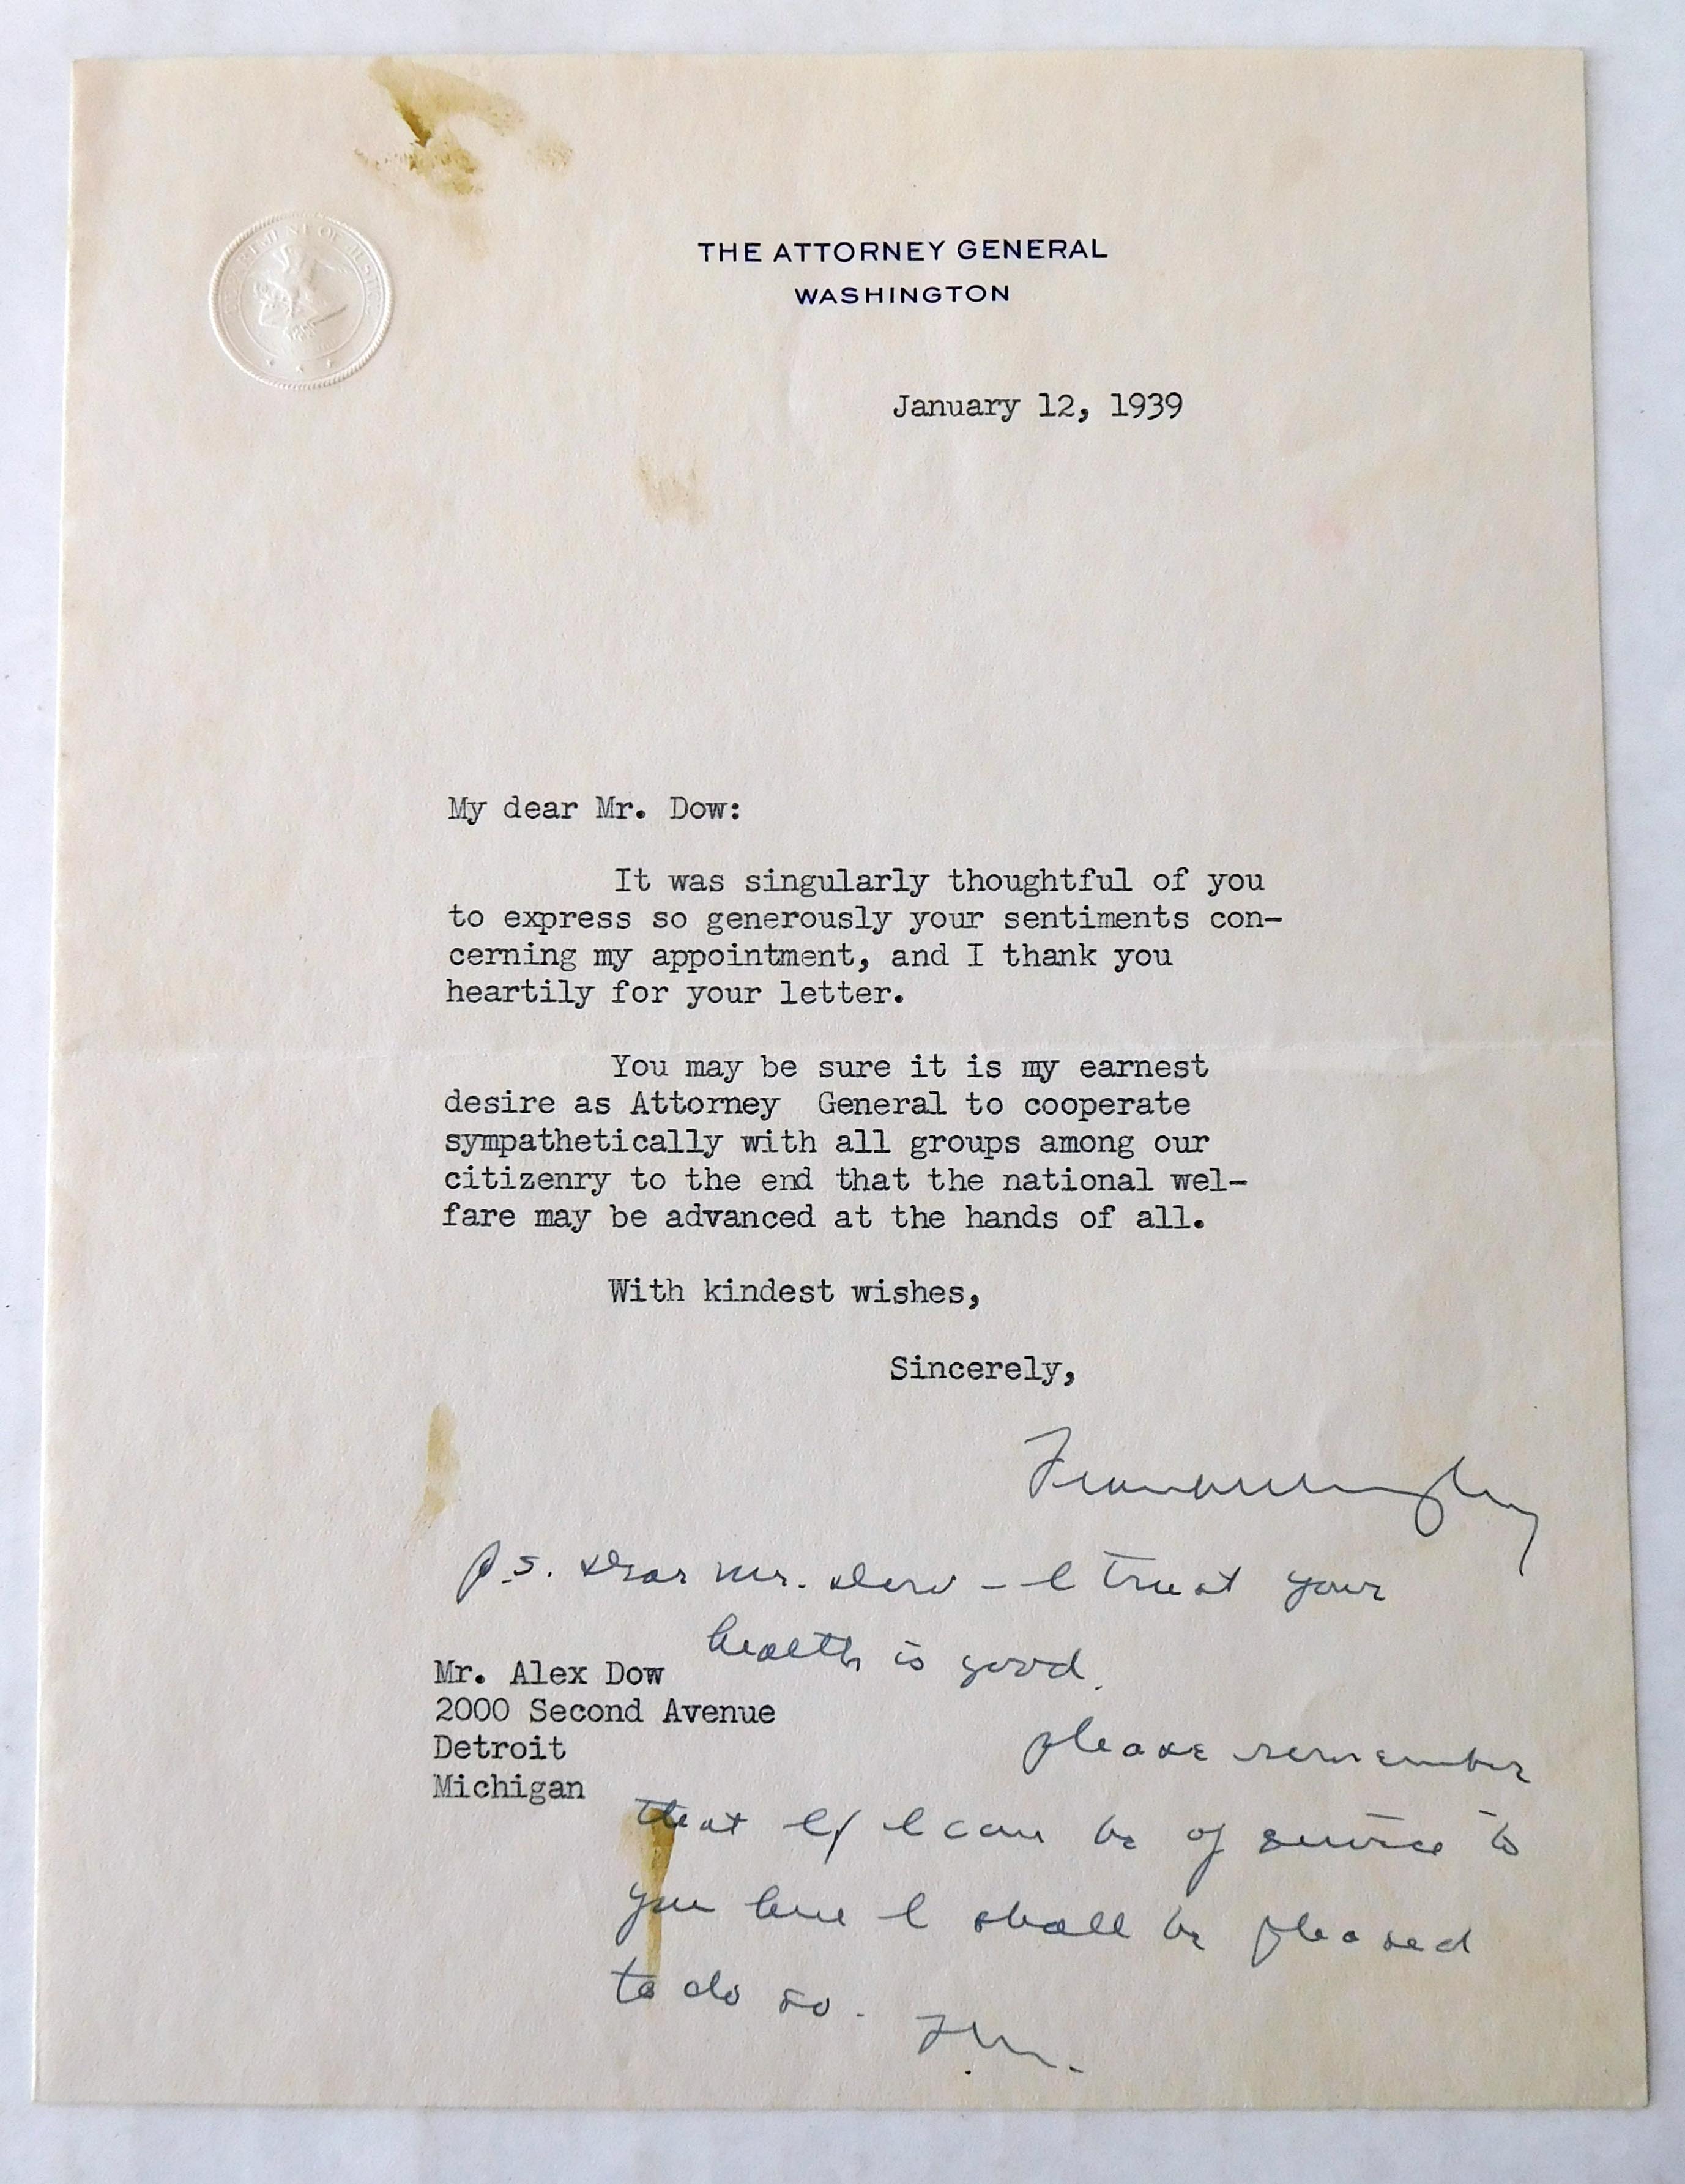 Murphy, Frank - Typed letter signed, a bifolium on The Attorney General Letterhead, Washington, with Murphy's additional personal remarks in his hand in blue ink, addressed to Alex Dow at 2000 Second Avenue in Detroit Michigan